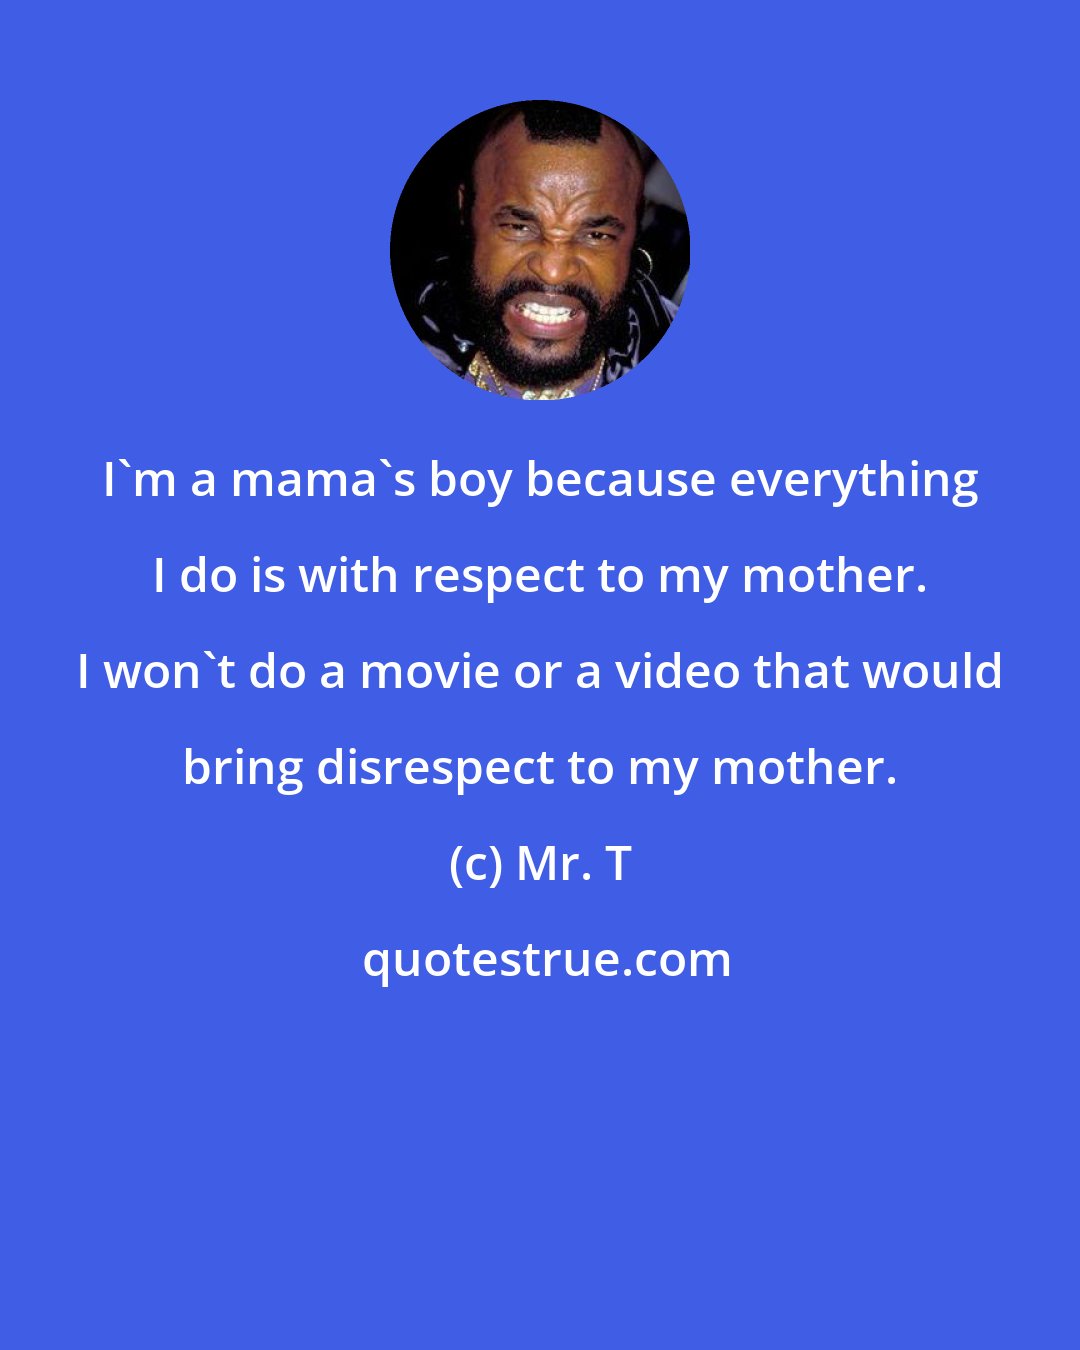 Mr. T: I'm a mama's boy because everything I do is with respect to my mother. I won't do a movie or a video that would bring disrespect to my mother.